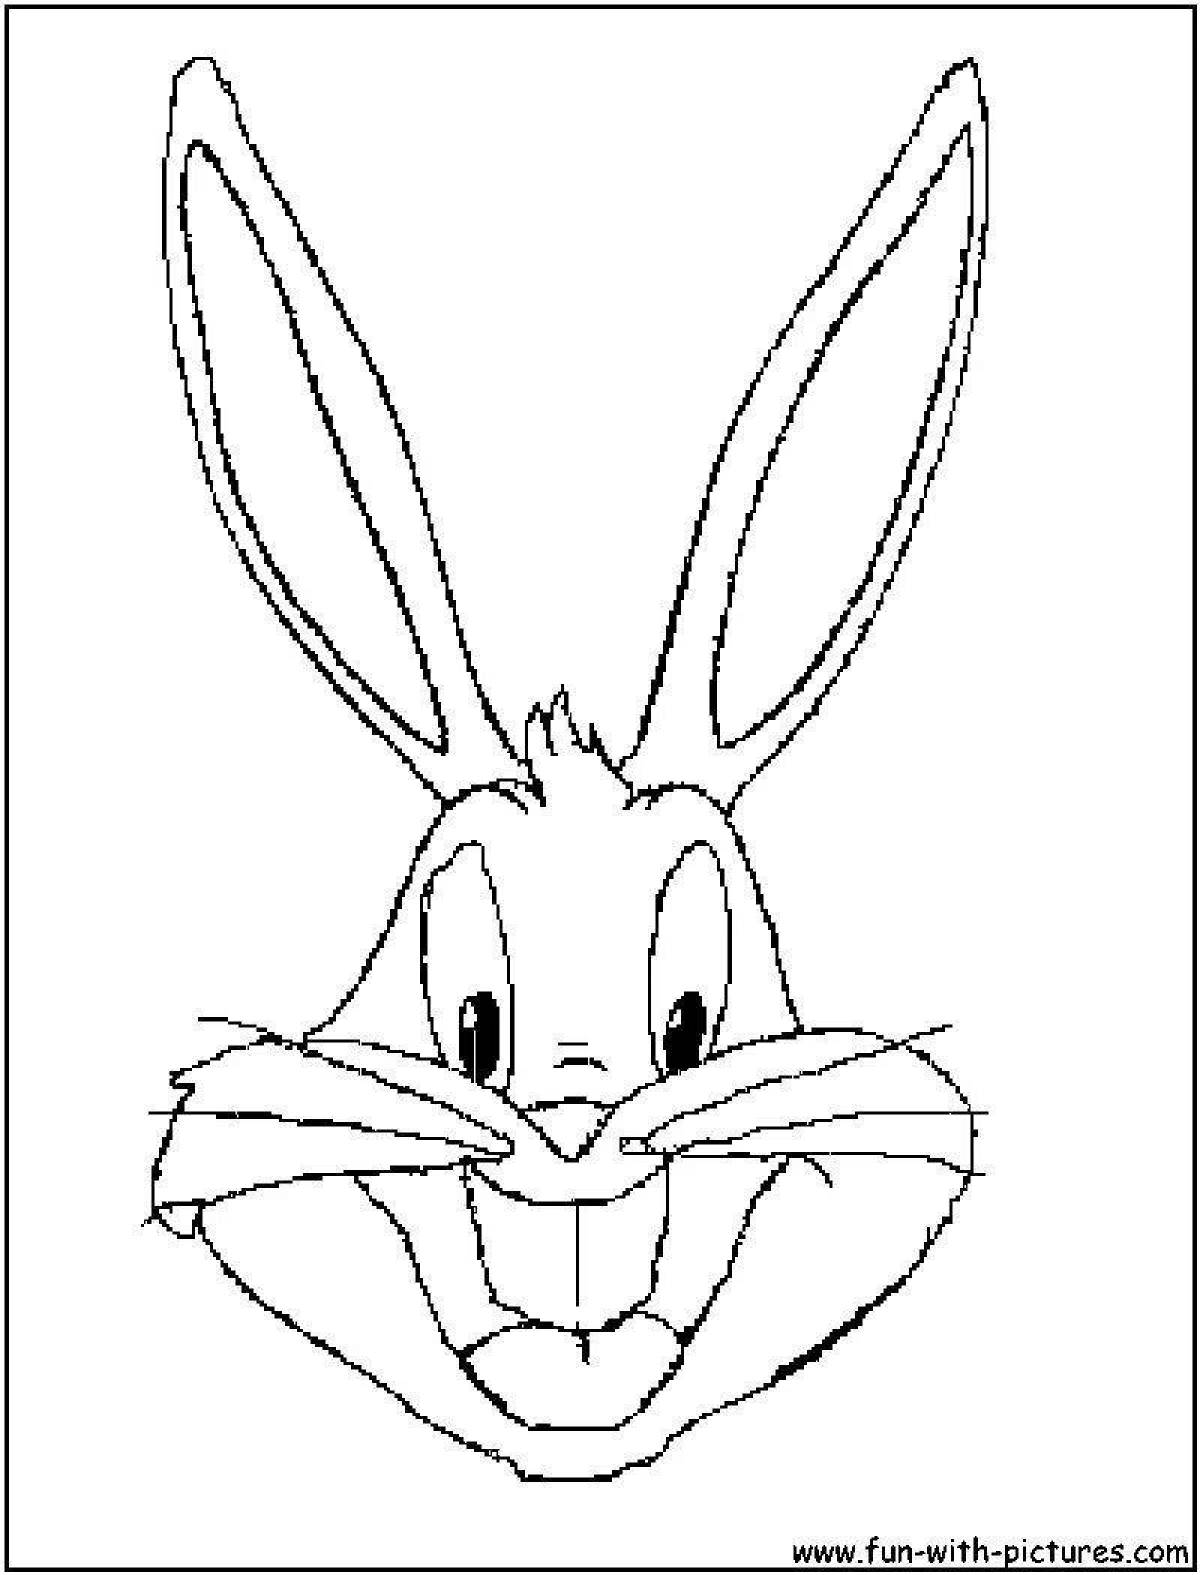 Coloring book glowing muzzle of a hare